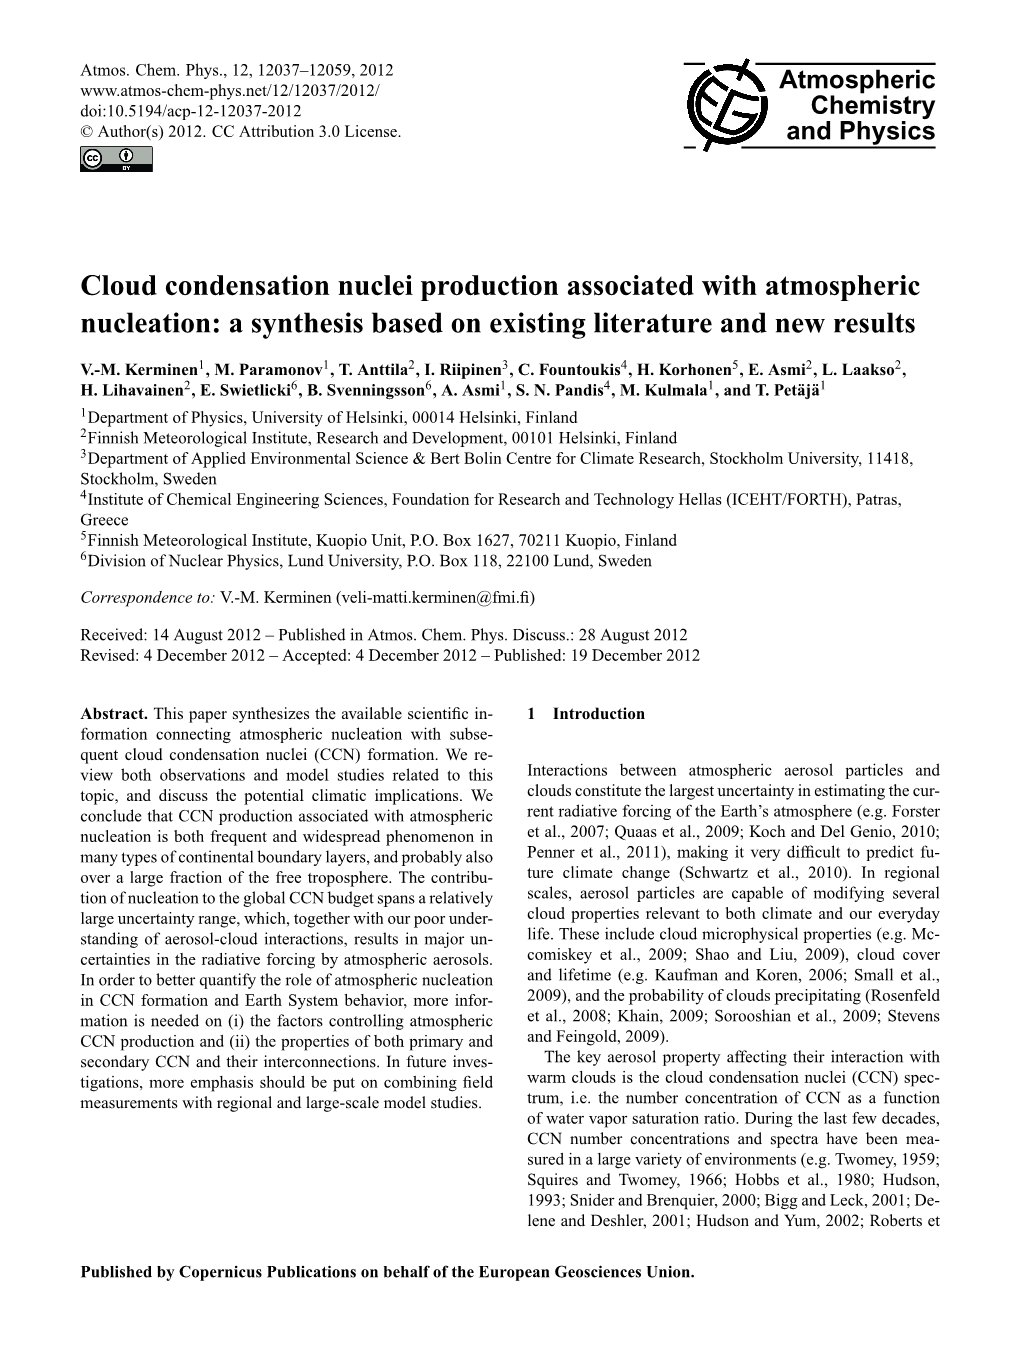 Cloud Condensation Nuclei Production Associated with Atmospheric Nucleation: a Synthesis Based on Existing Literature and New Results